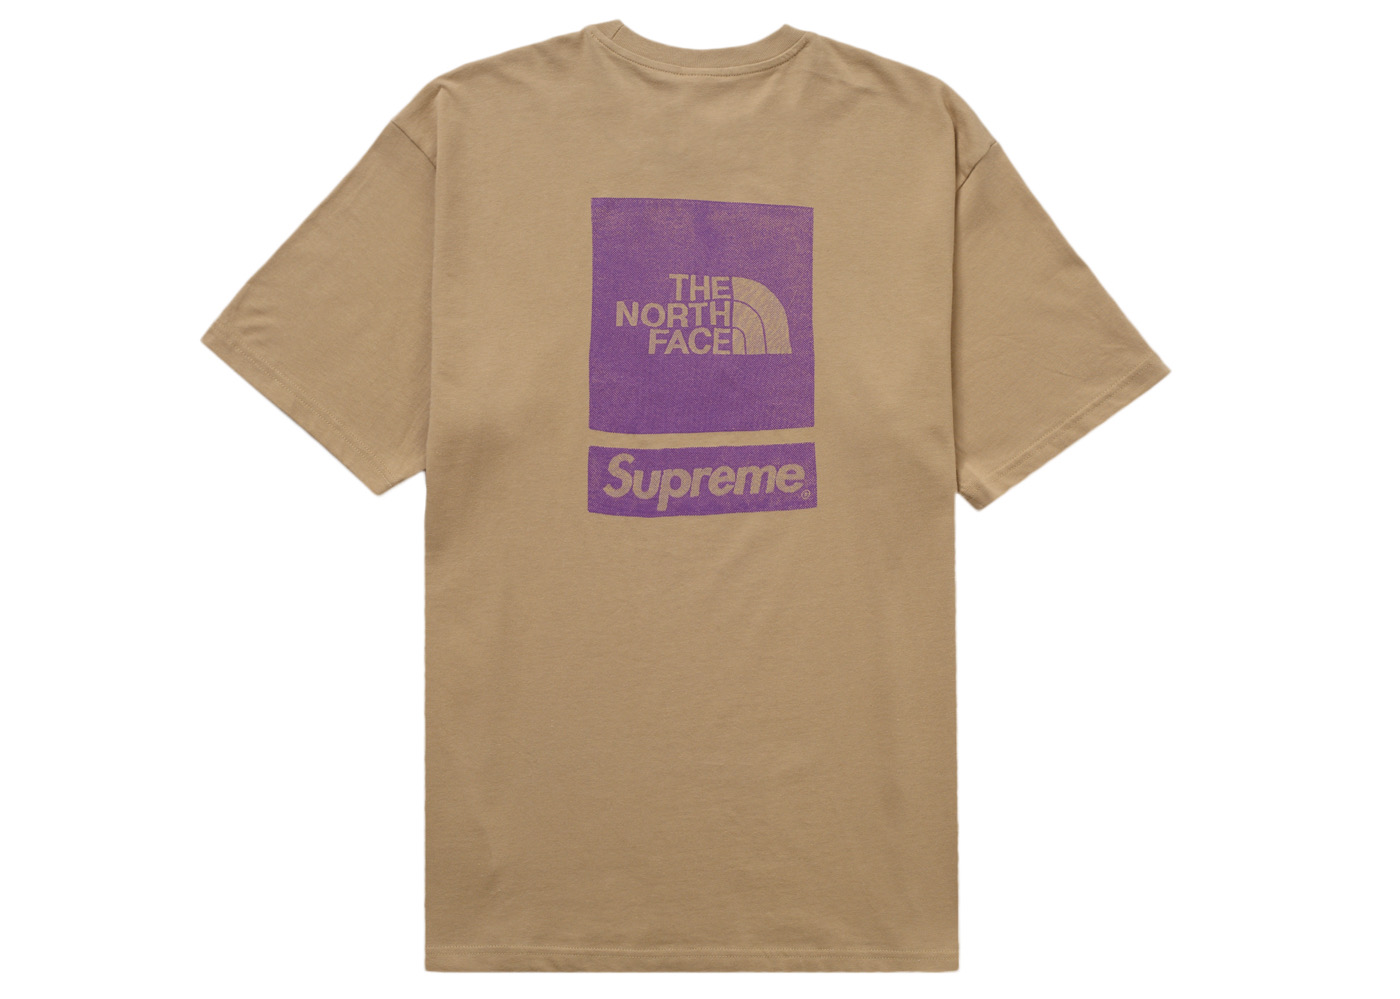 Supreme x The North Face S/S Topトップス